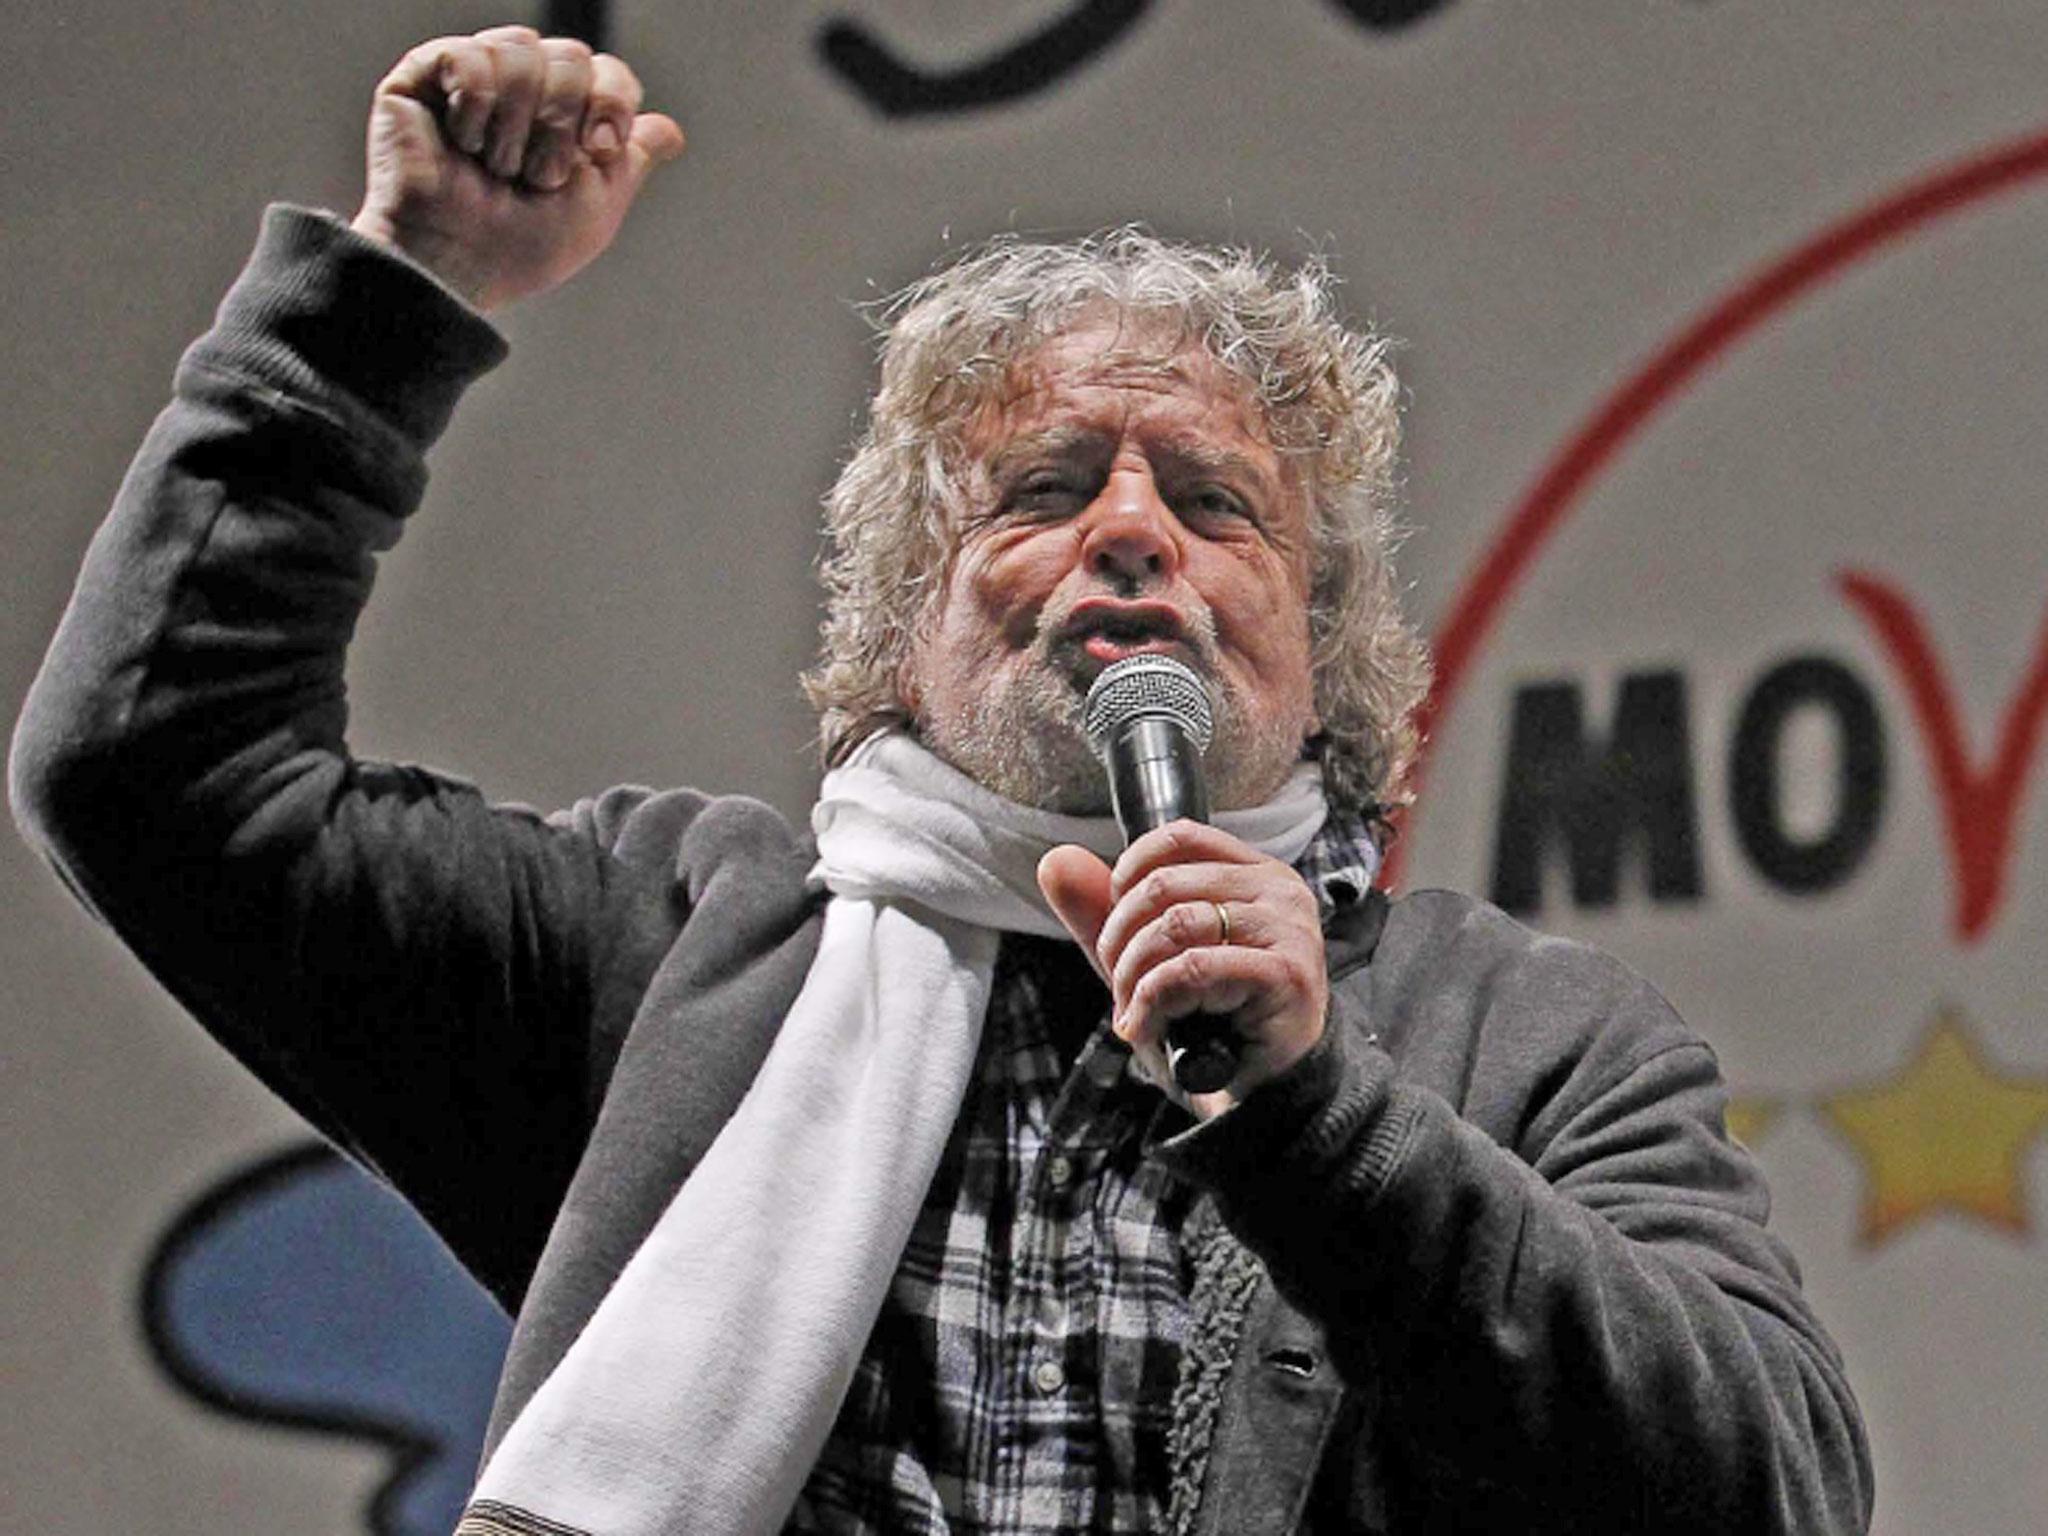 Beppe Grilloa, a charismatic 64-year-old comedian from Genoa whose anti-political non-party, the Five-Star Movement, has come roaring